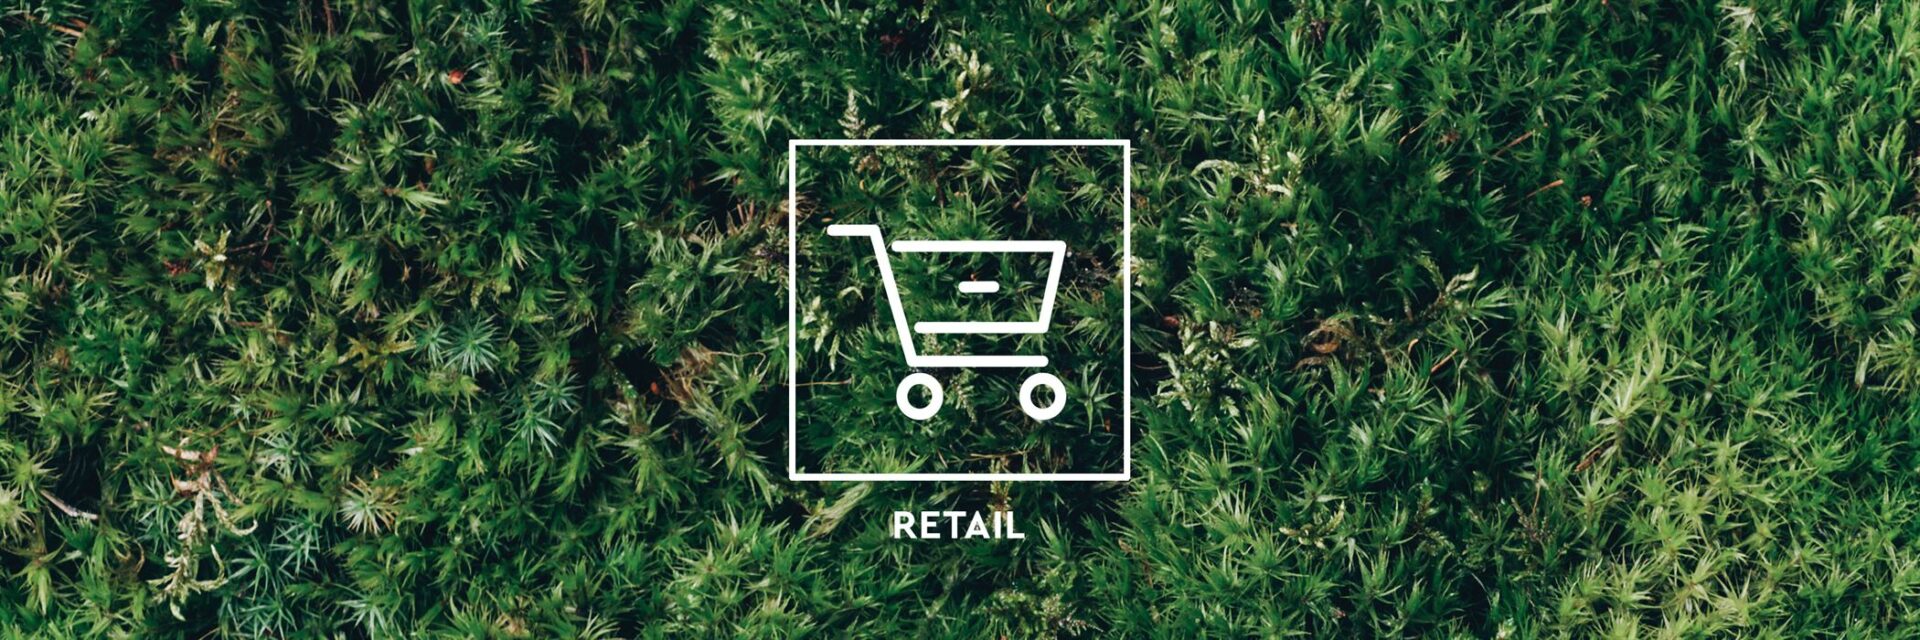 Retail | OL-A Products